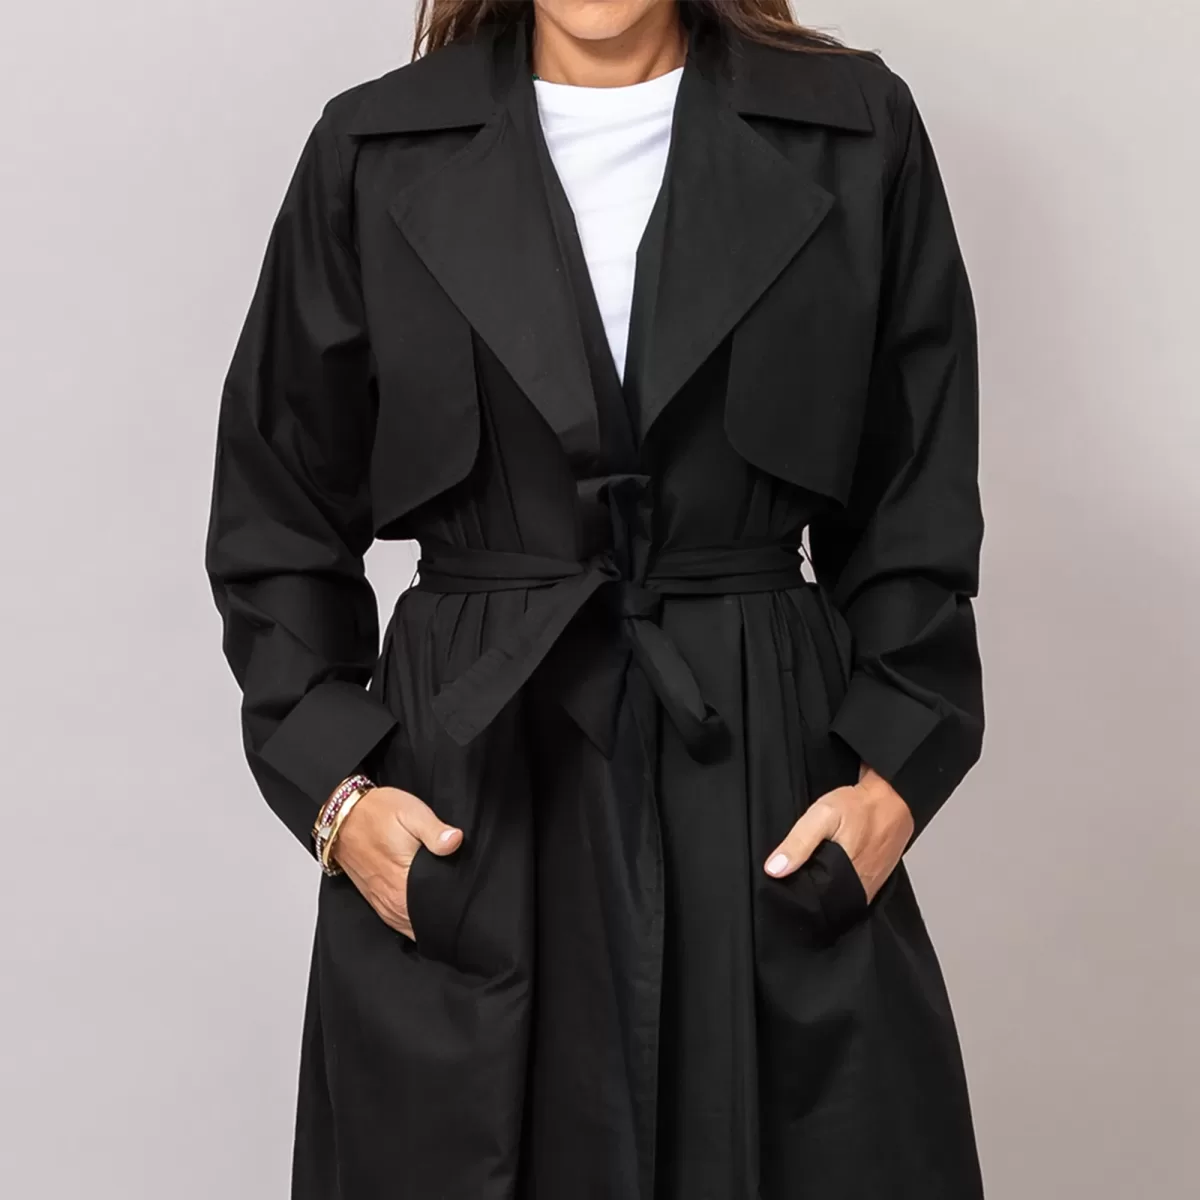 Duster Textured Cotton Black Coat with Gilet